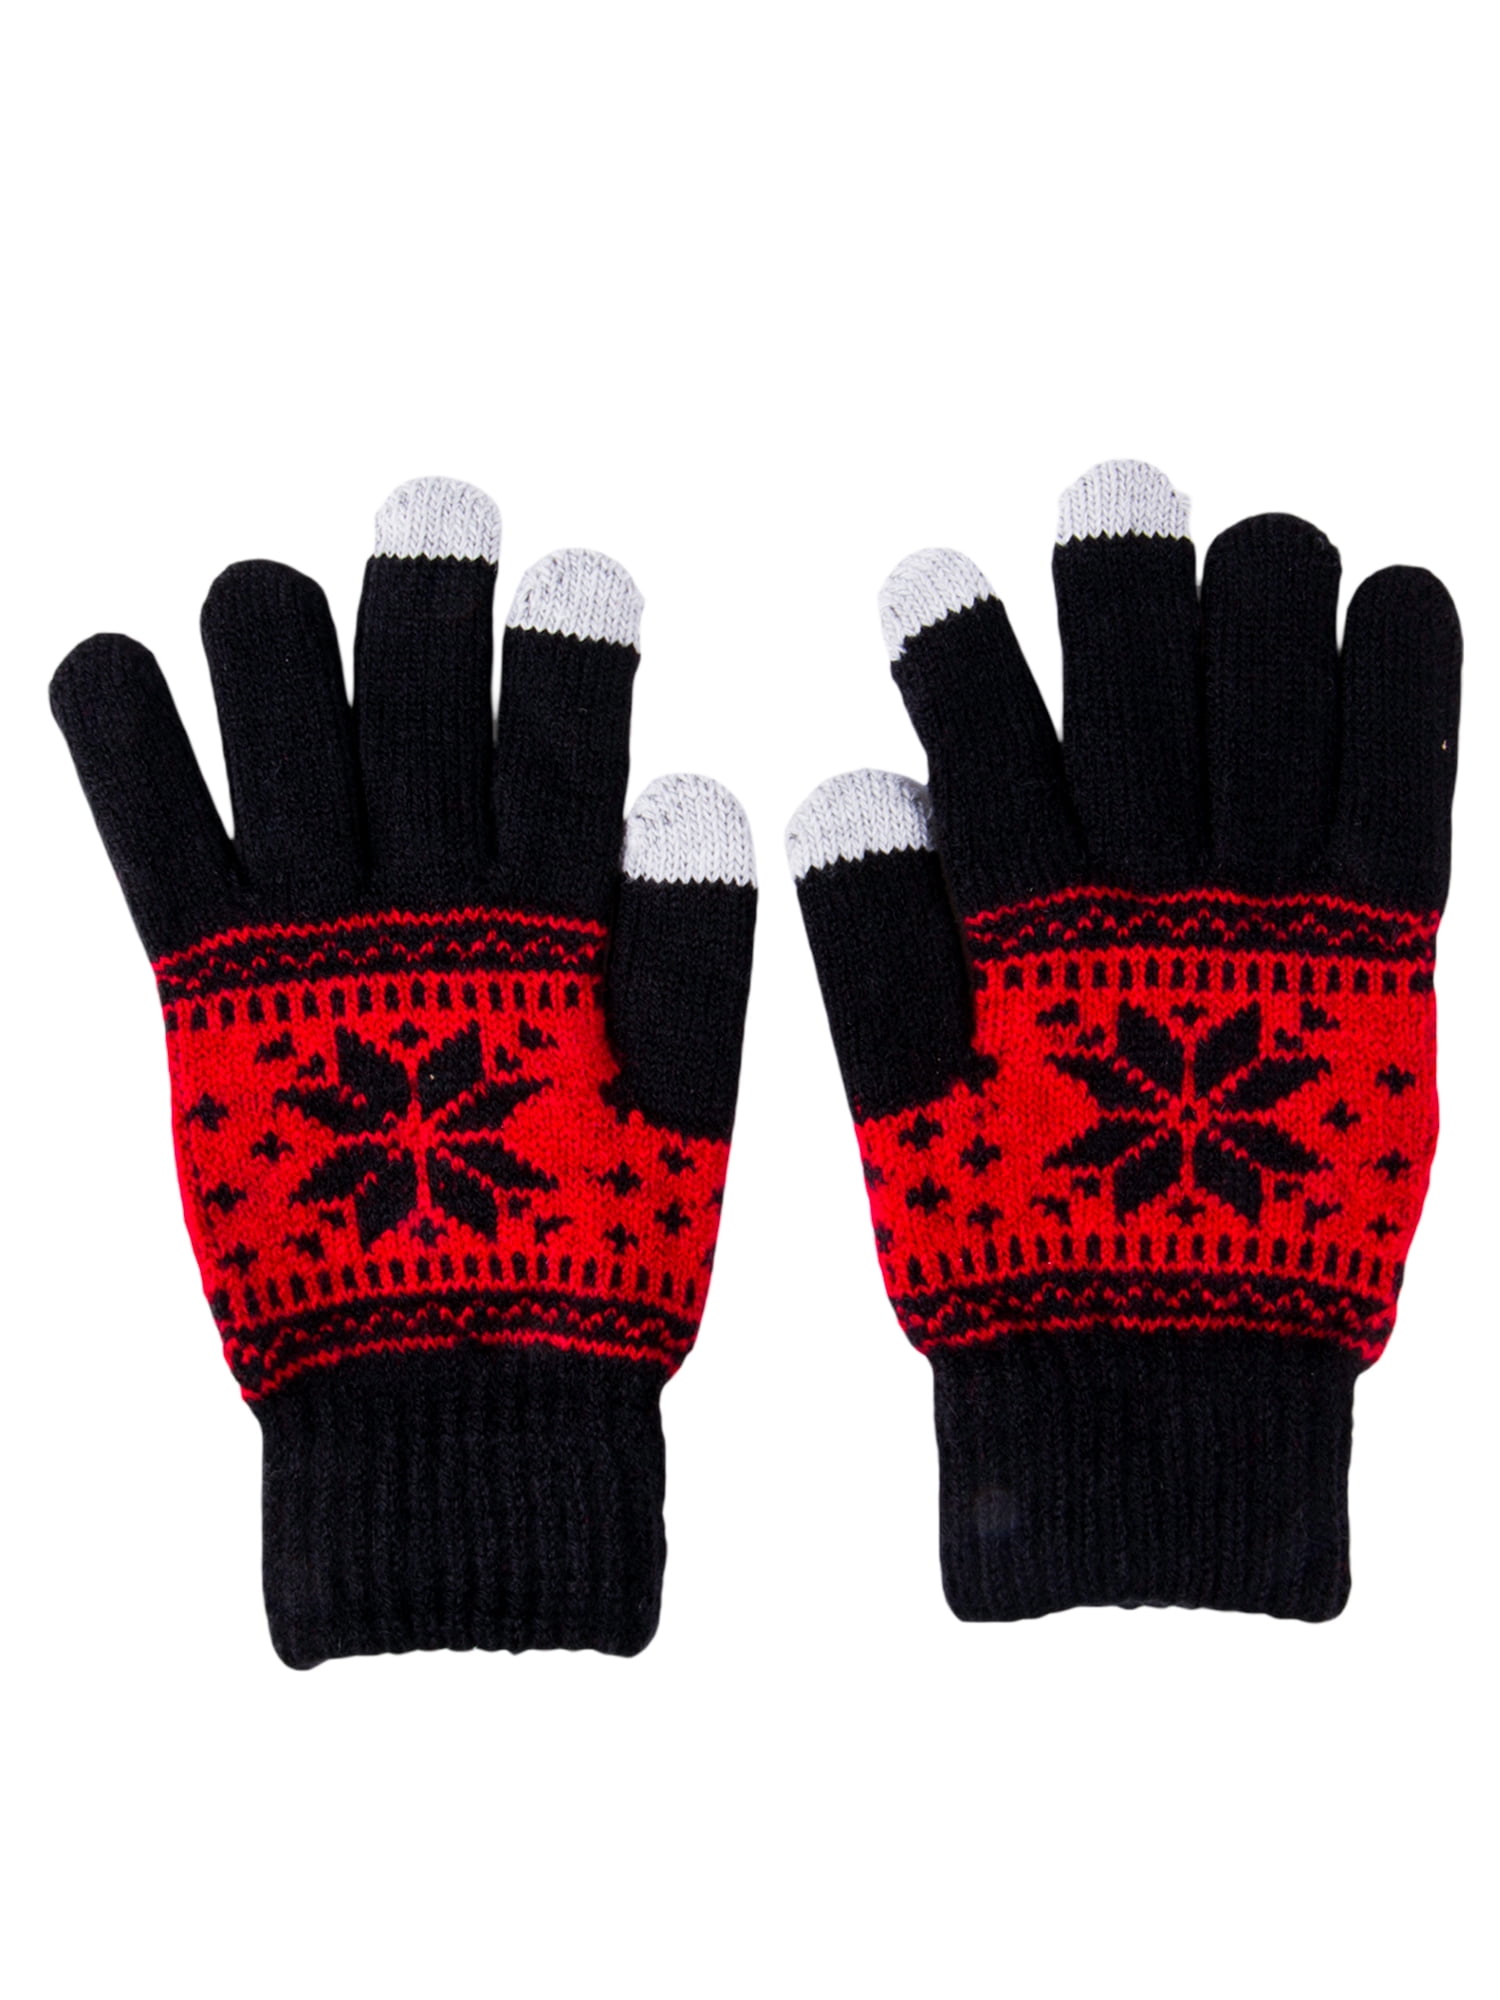 UK Womens Ladies Snowflake Knitted Thermal Touch Screen Gloves Winter Warm Gift 